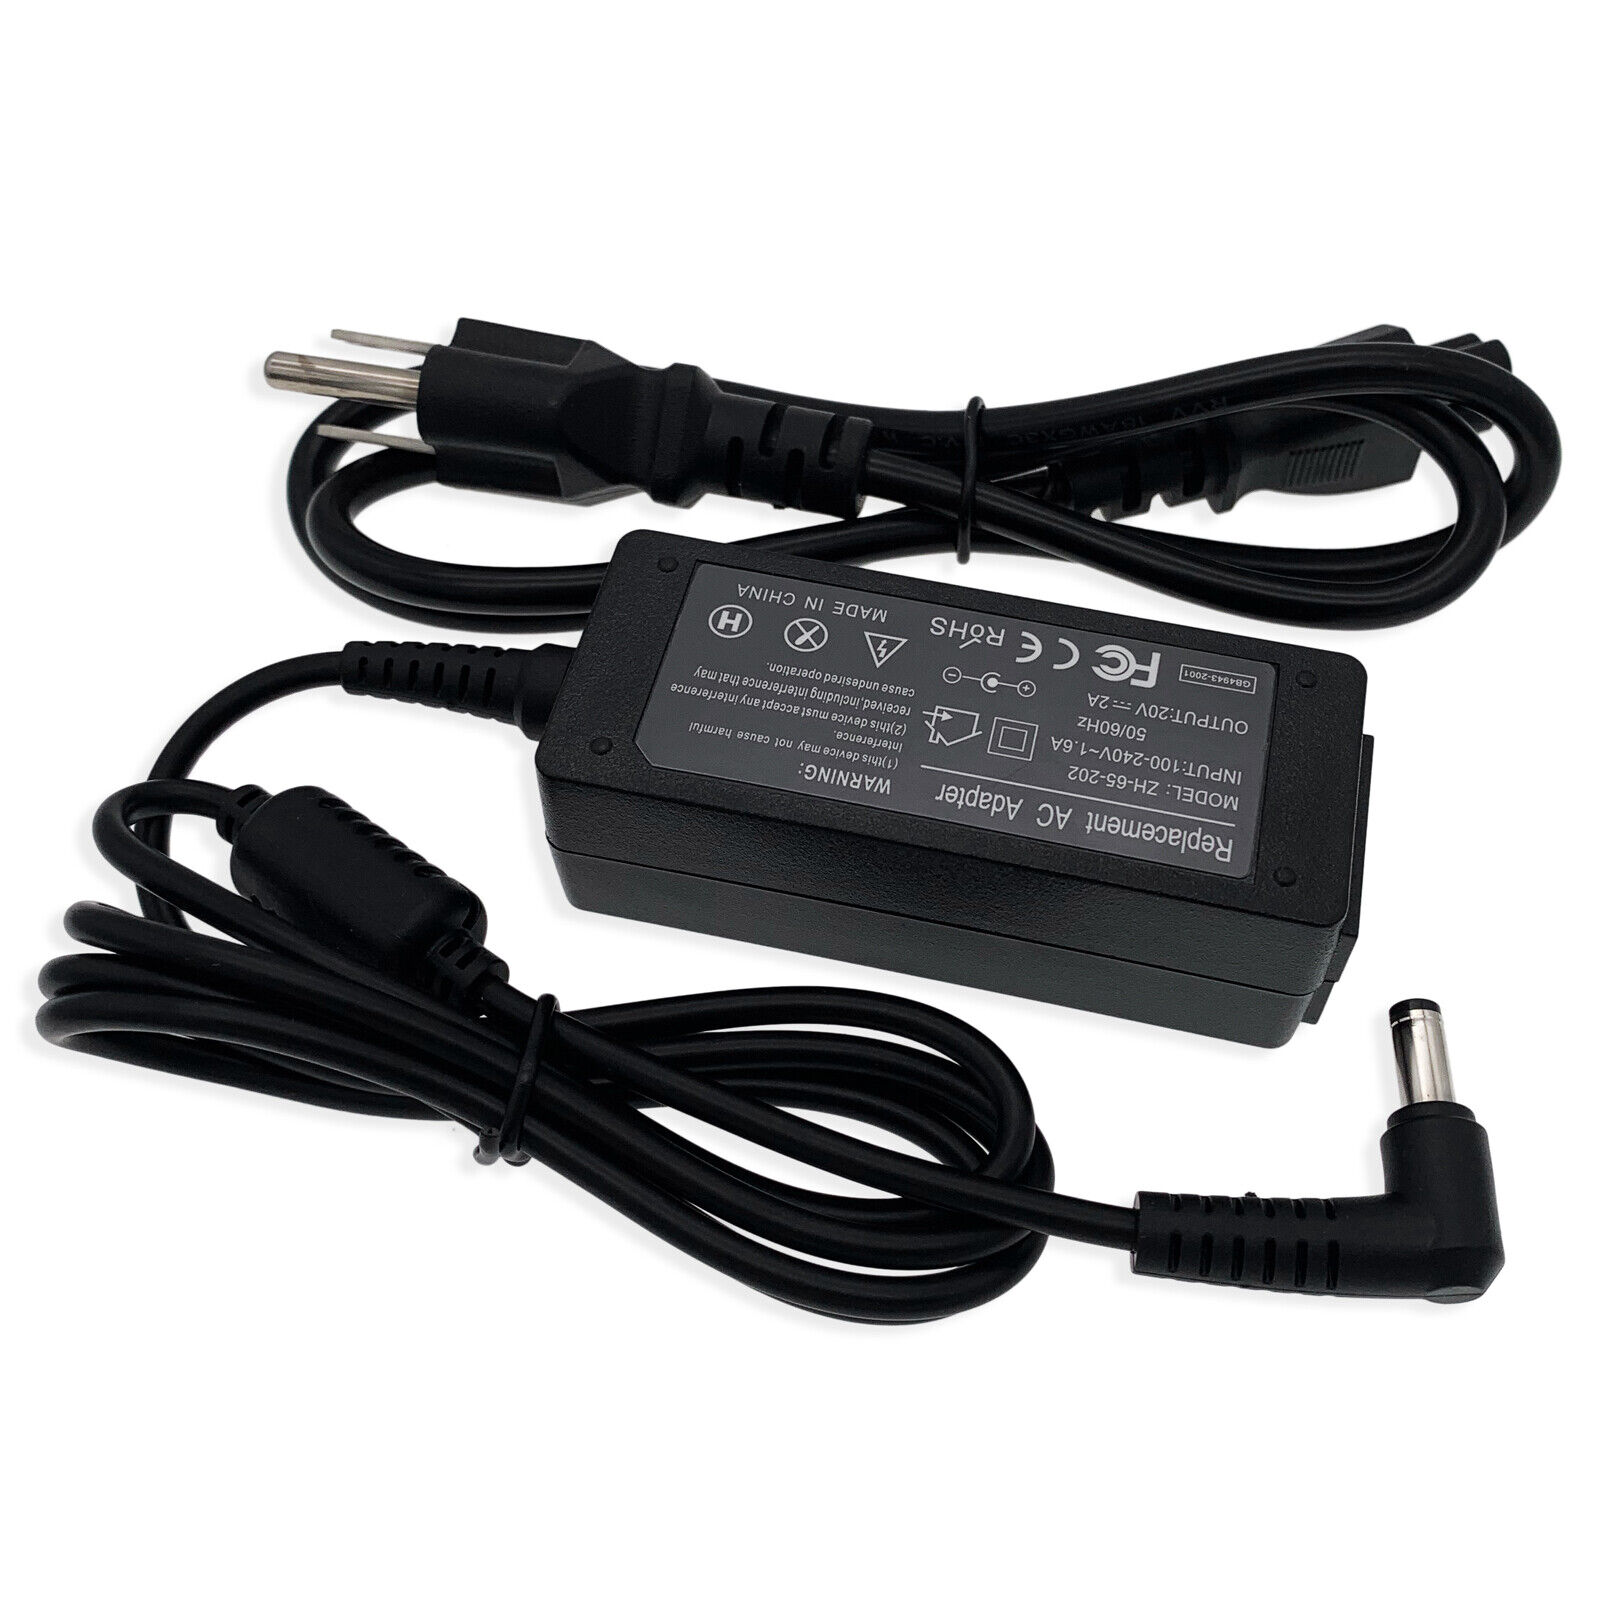 20V 2A New Laptop AC Power Adapter Charger FOR LG X110 X110-G X120 X130 NetBook Bundled Items Power Cable Color Black C - Click Image to Close